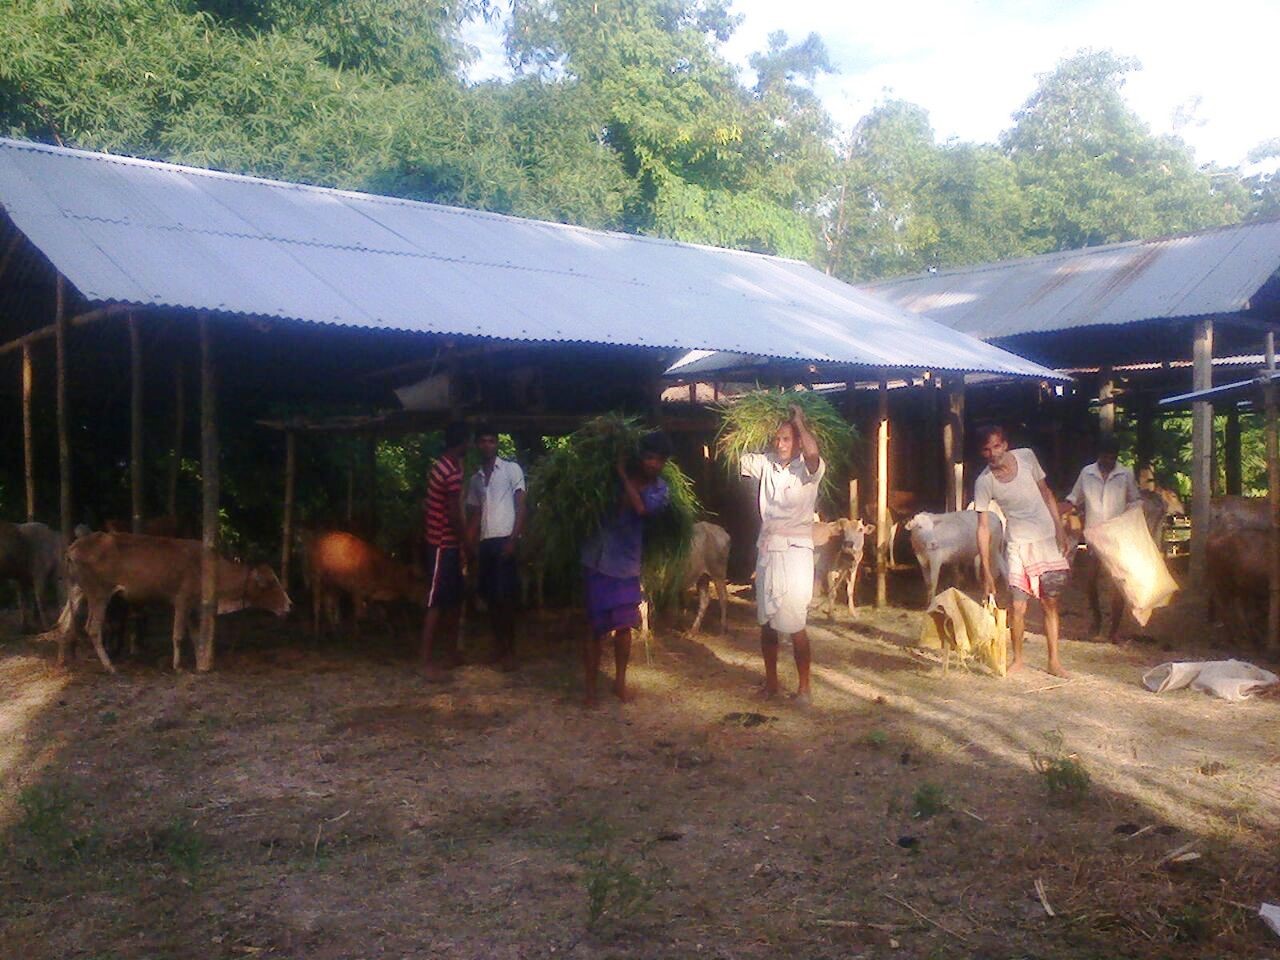 Image 14 and 15: The Highland at Jhapooripather being used by villagers and animals. This Highland proved to be a great boon to the 100-odd families of this village as they could take shelter here during the flood.